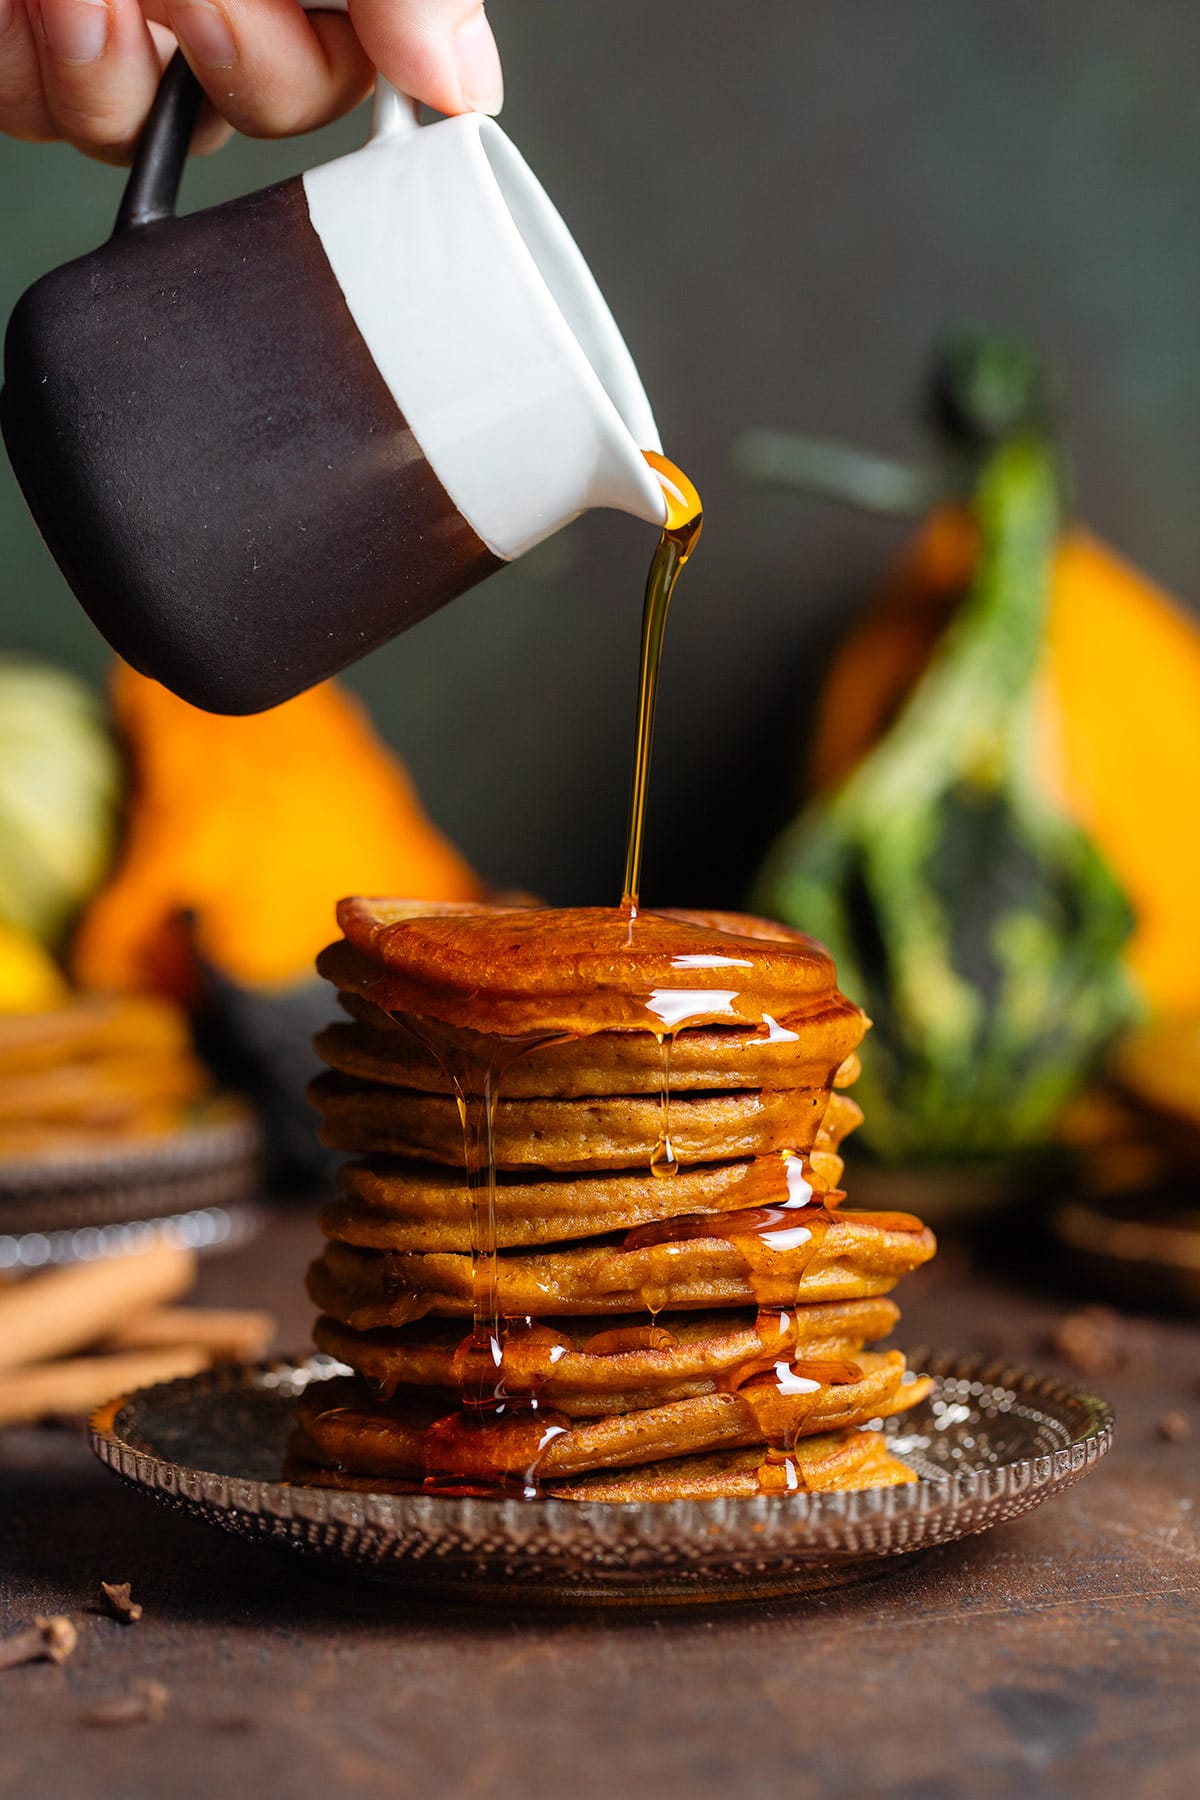 Pumpkin pancakes stacked on a brown glass plate with maple syrup being poured over the top.